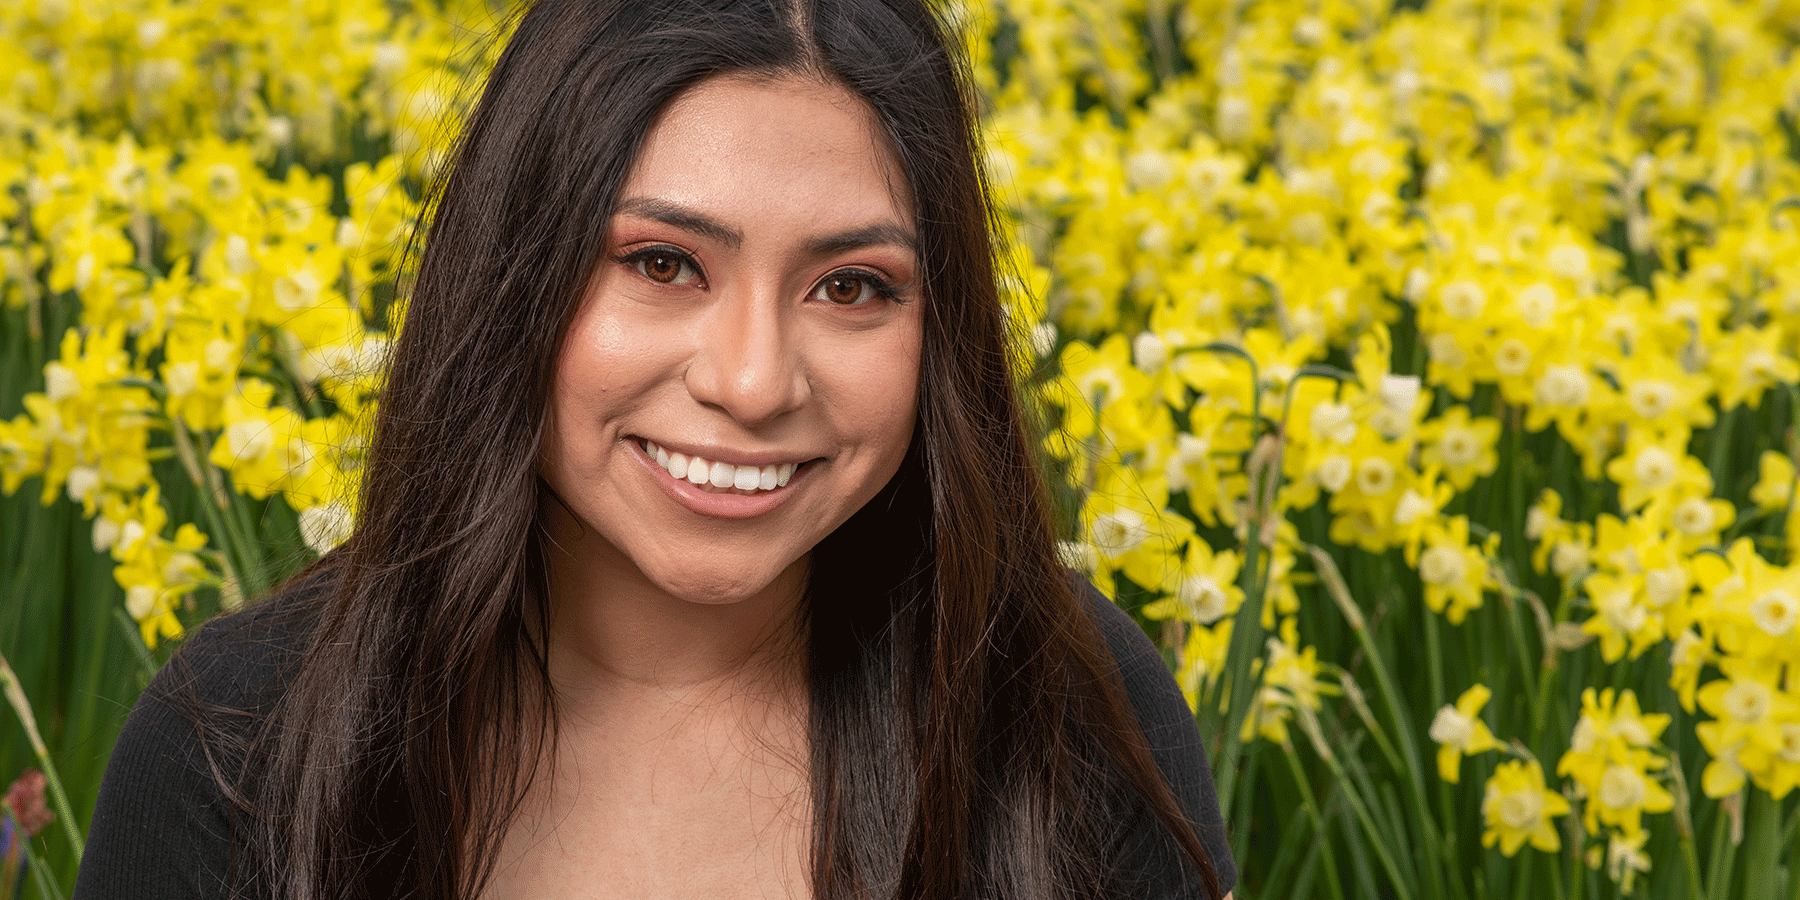 A smiling young Latina woman with long, dark hair is shown with a background of yellow and white flowers.